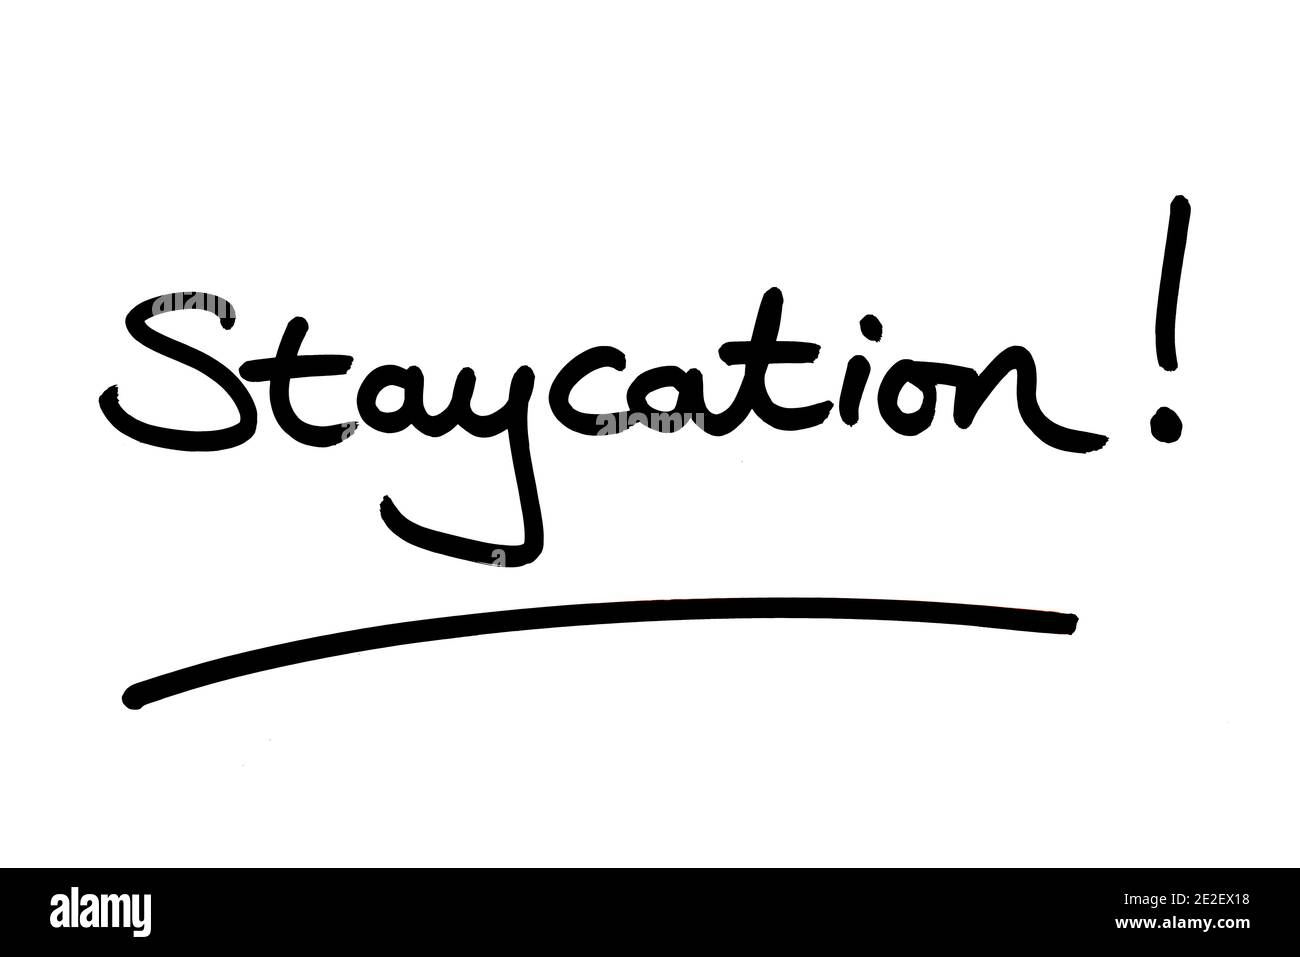 The word Staycation! handwritten on a white background. Stock Photo